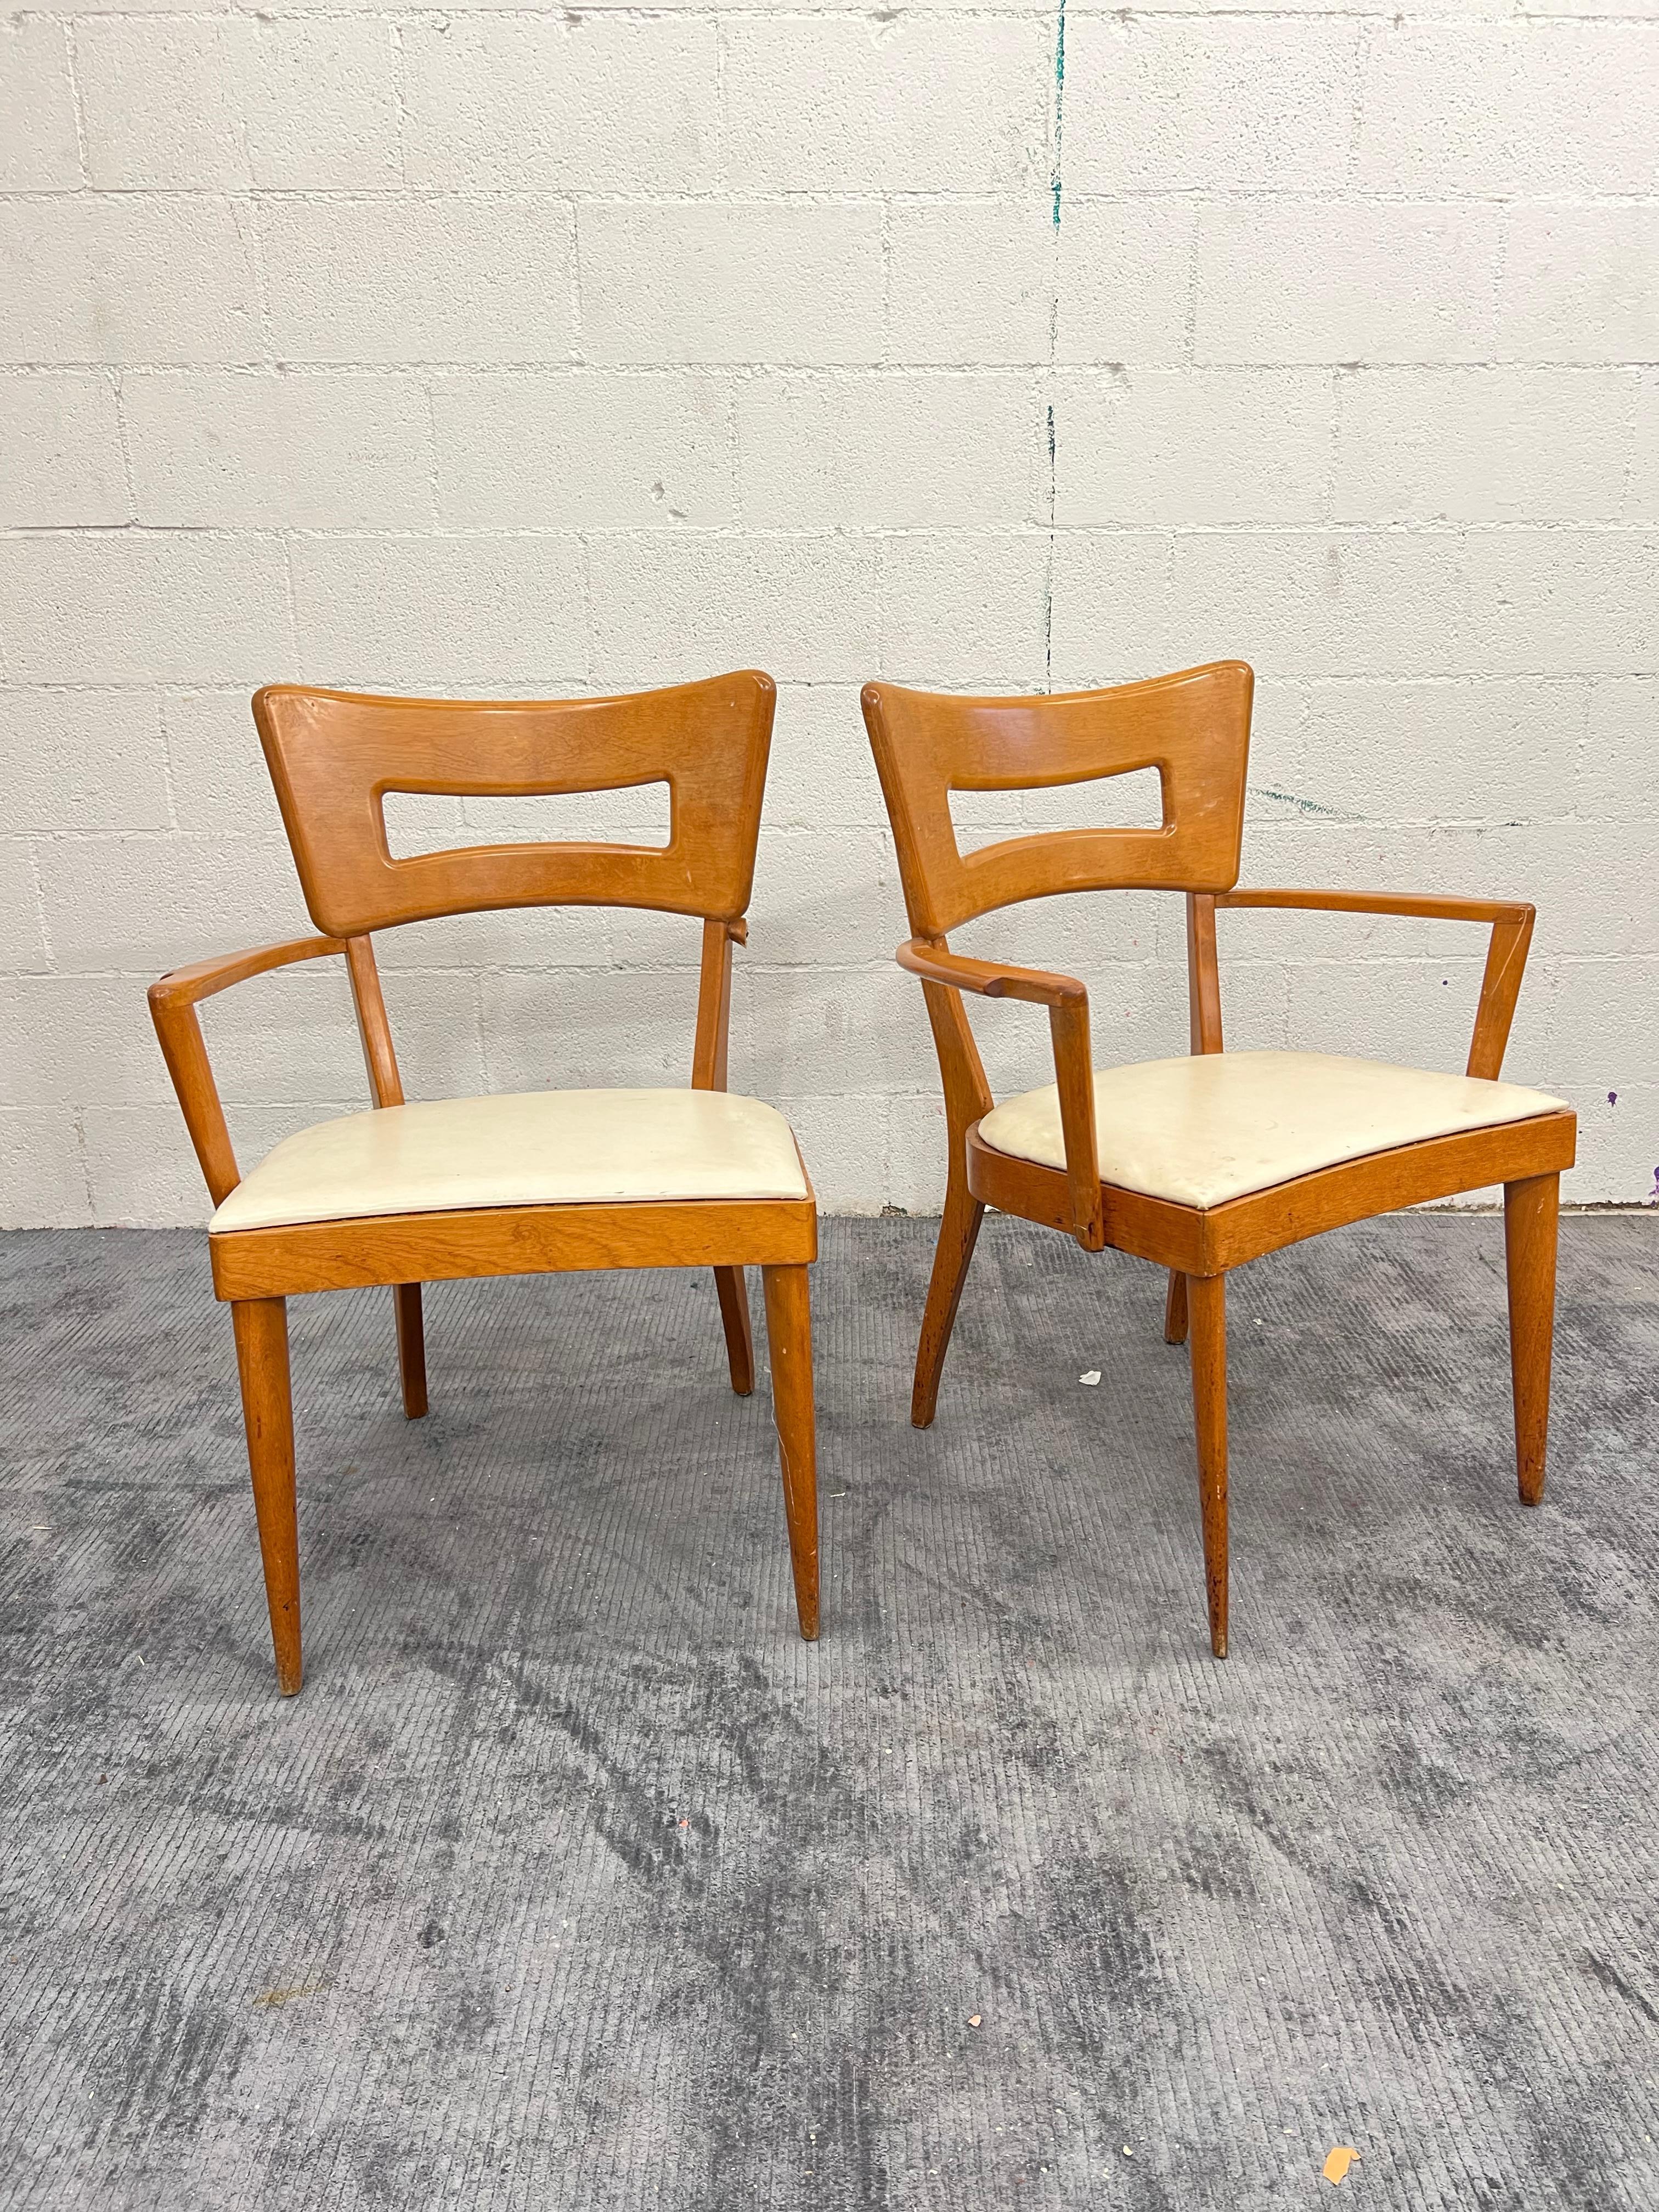 Condition note: please be aware one of the arm chairs is missing an armrest, will need to be rebuilt. 

Vintage Heywood Wakefield Dog bone Dining Chairs in Westwood finish. With original ivory faux leather. 

Side chair measurements: 33″ height 18″